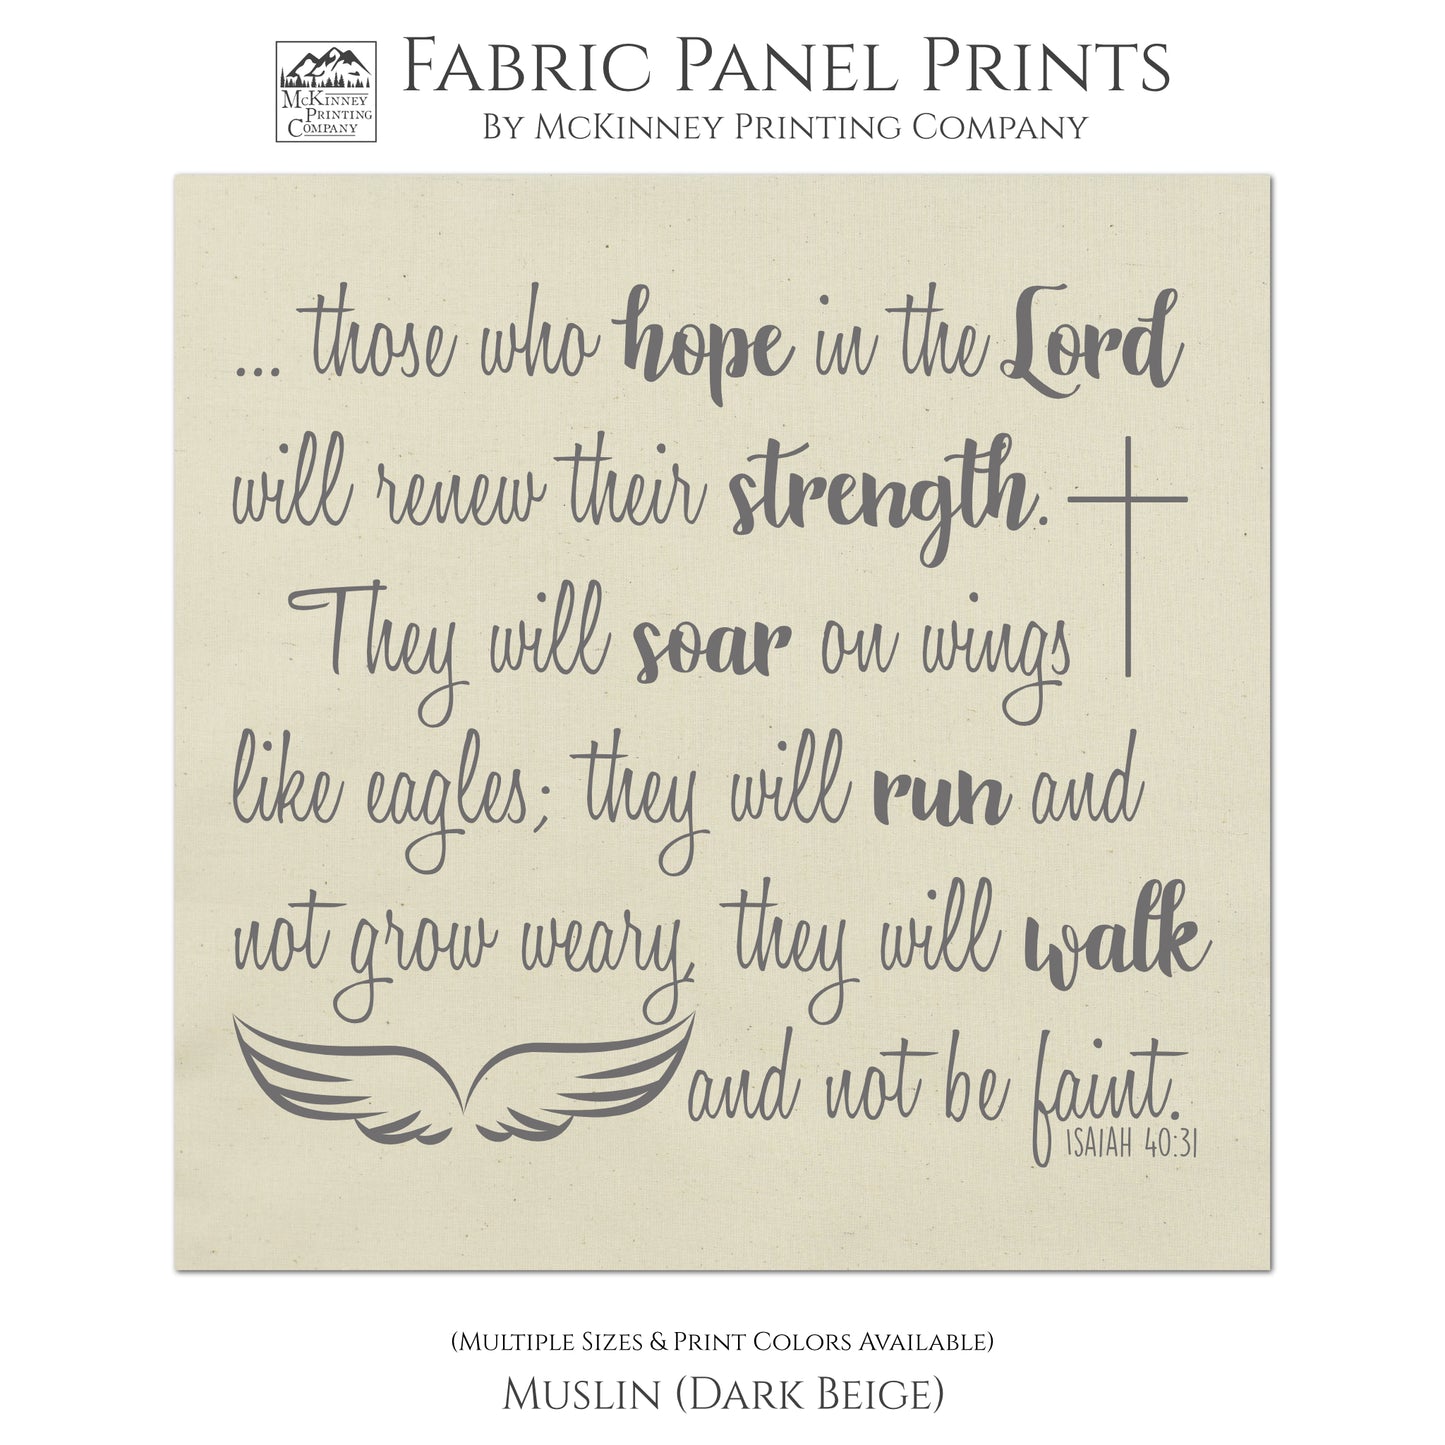 Isaiah 40:31 - Those who hope in the Lord will renew their strength.  They will soar on wings like eagles; they will run and not grow weary, they will walk and not be faint.  - Fabric Panel Print for Quilts - Muslin